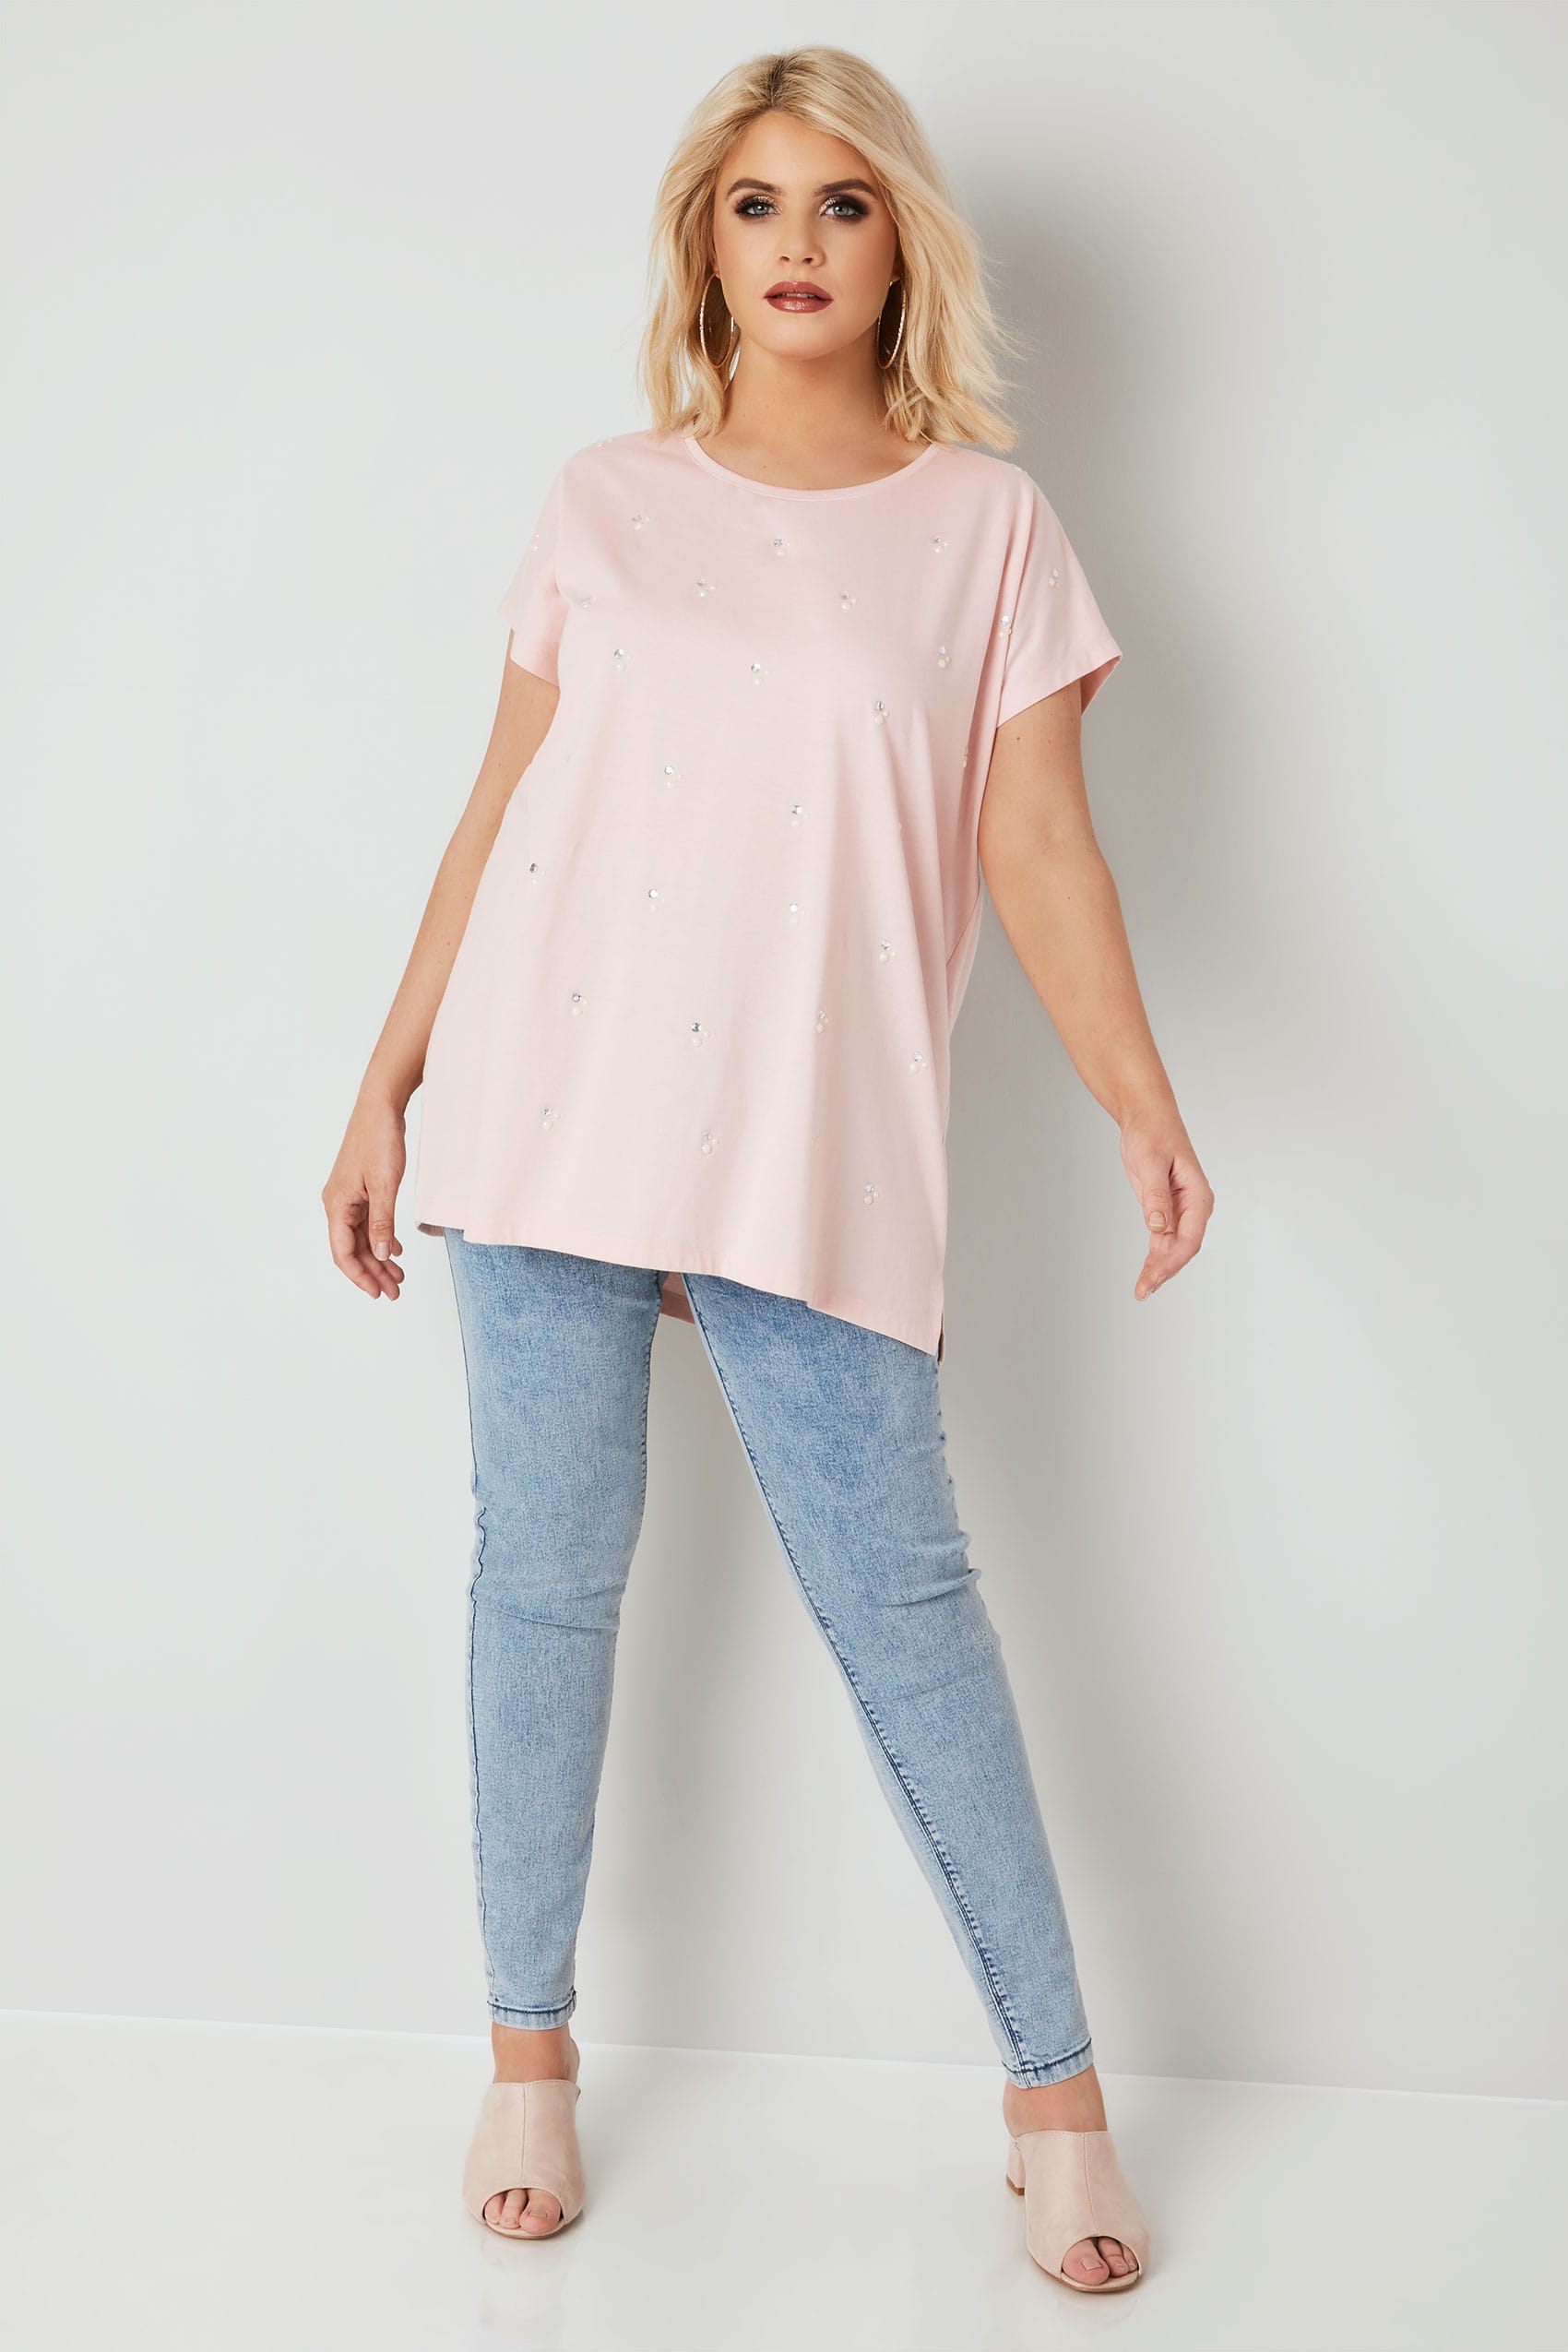 Light Pink Pearlescent & Diamante Embellished T-Shirt, plus size 16 to 36